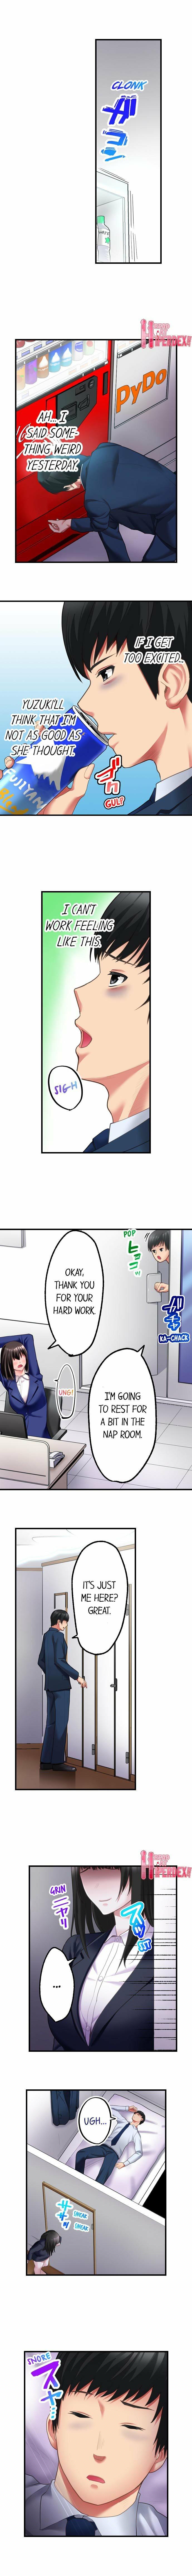 [Kayanoi Ino] Busted by my Co-Worker 18/18 [English] Completed 136